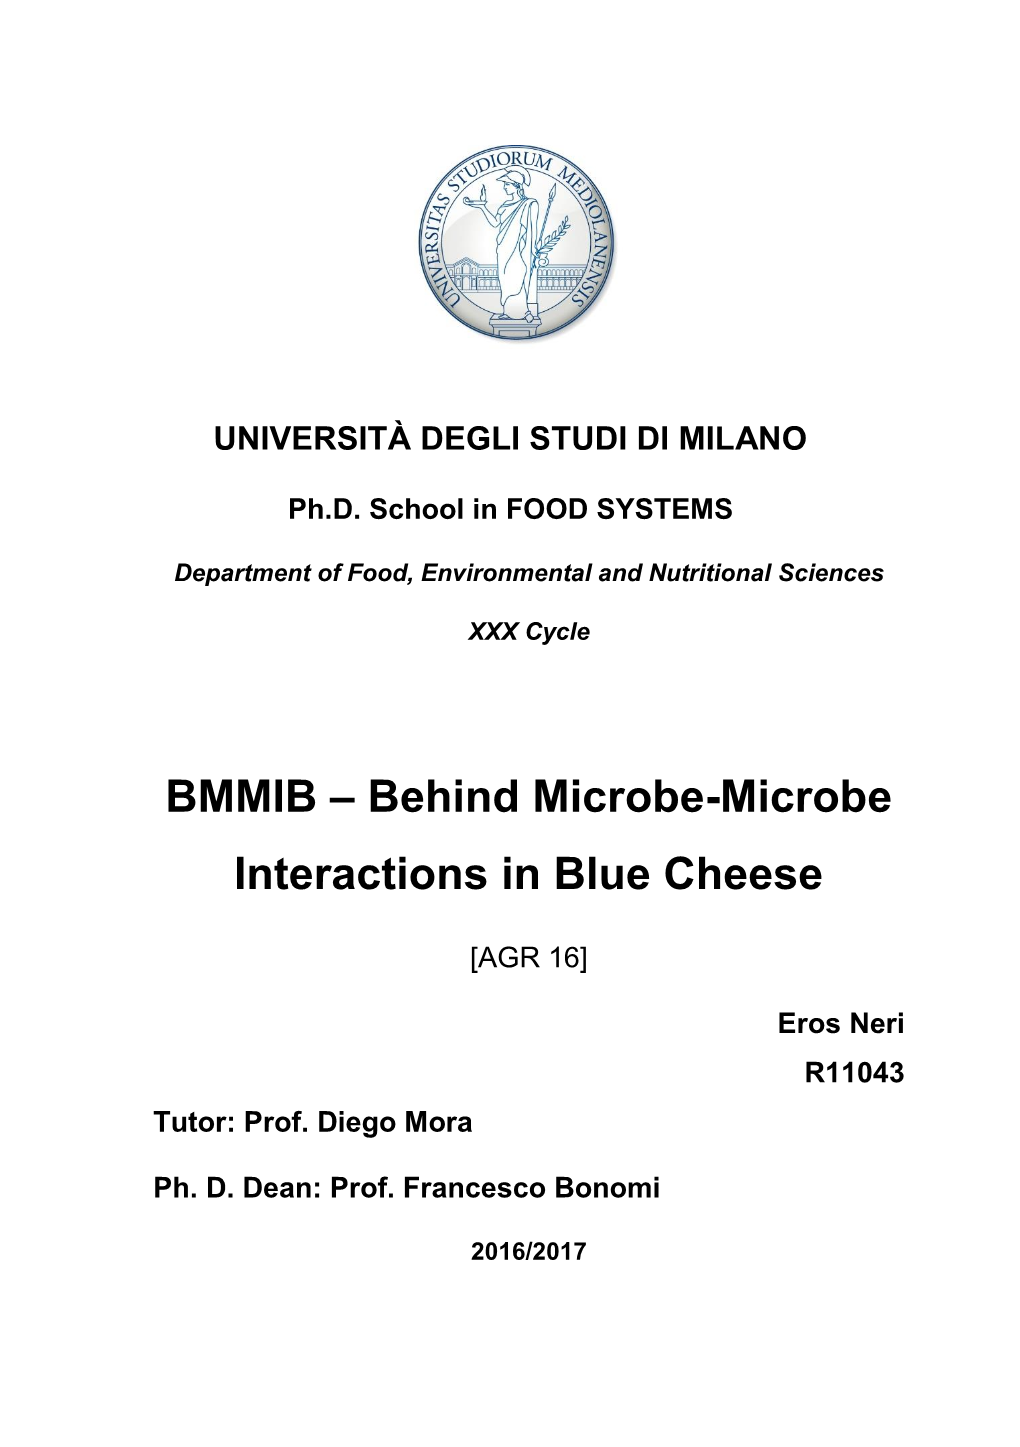 Behind Microbe-Microbe Interactions in Blue Cheese